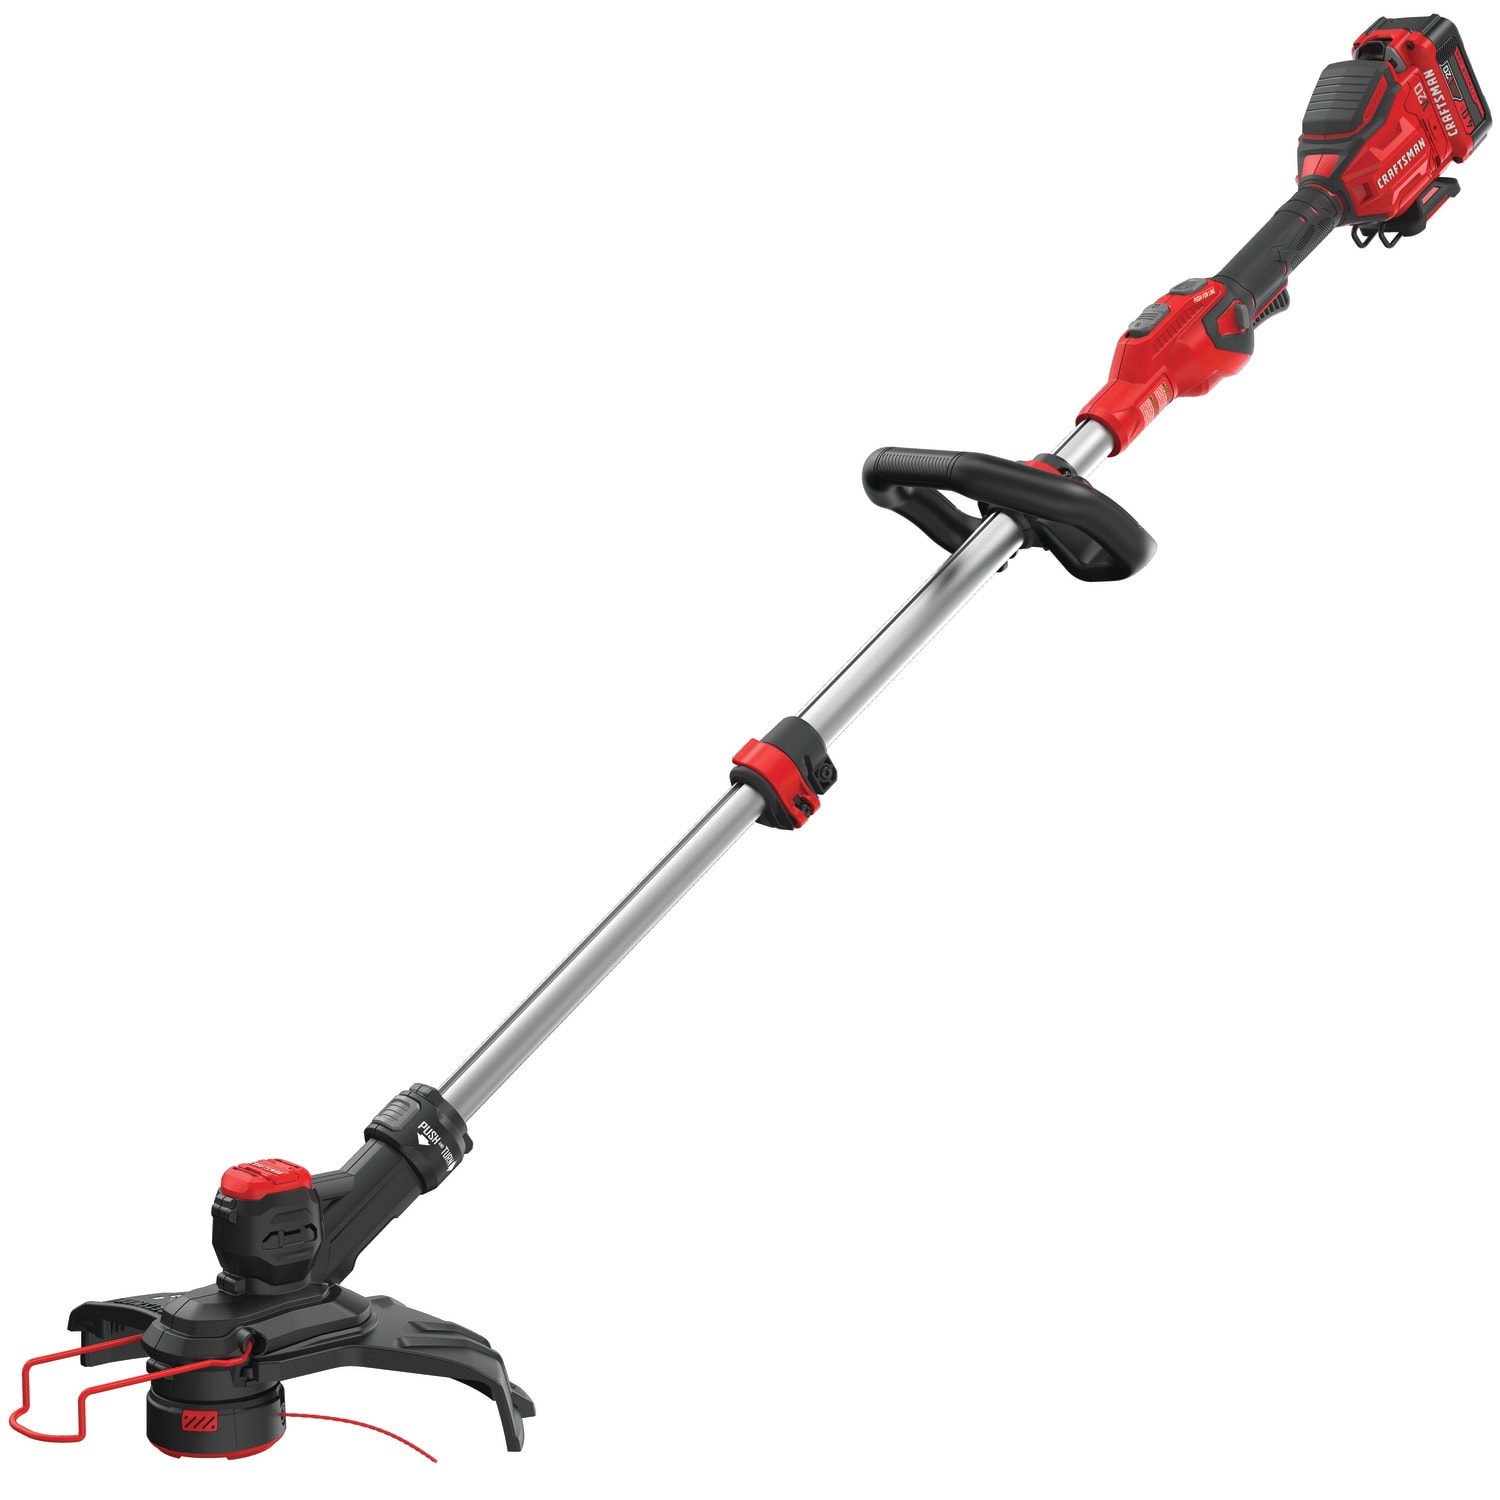 Image of String trimmer from Lowes